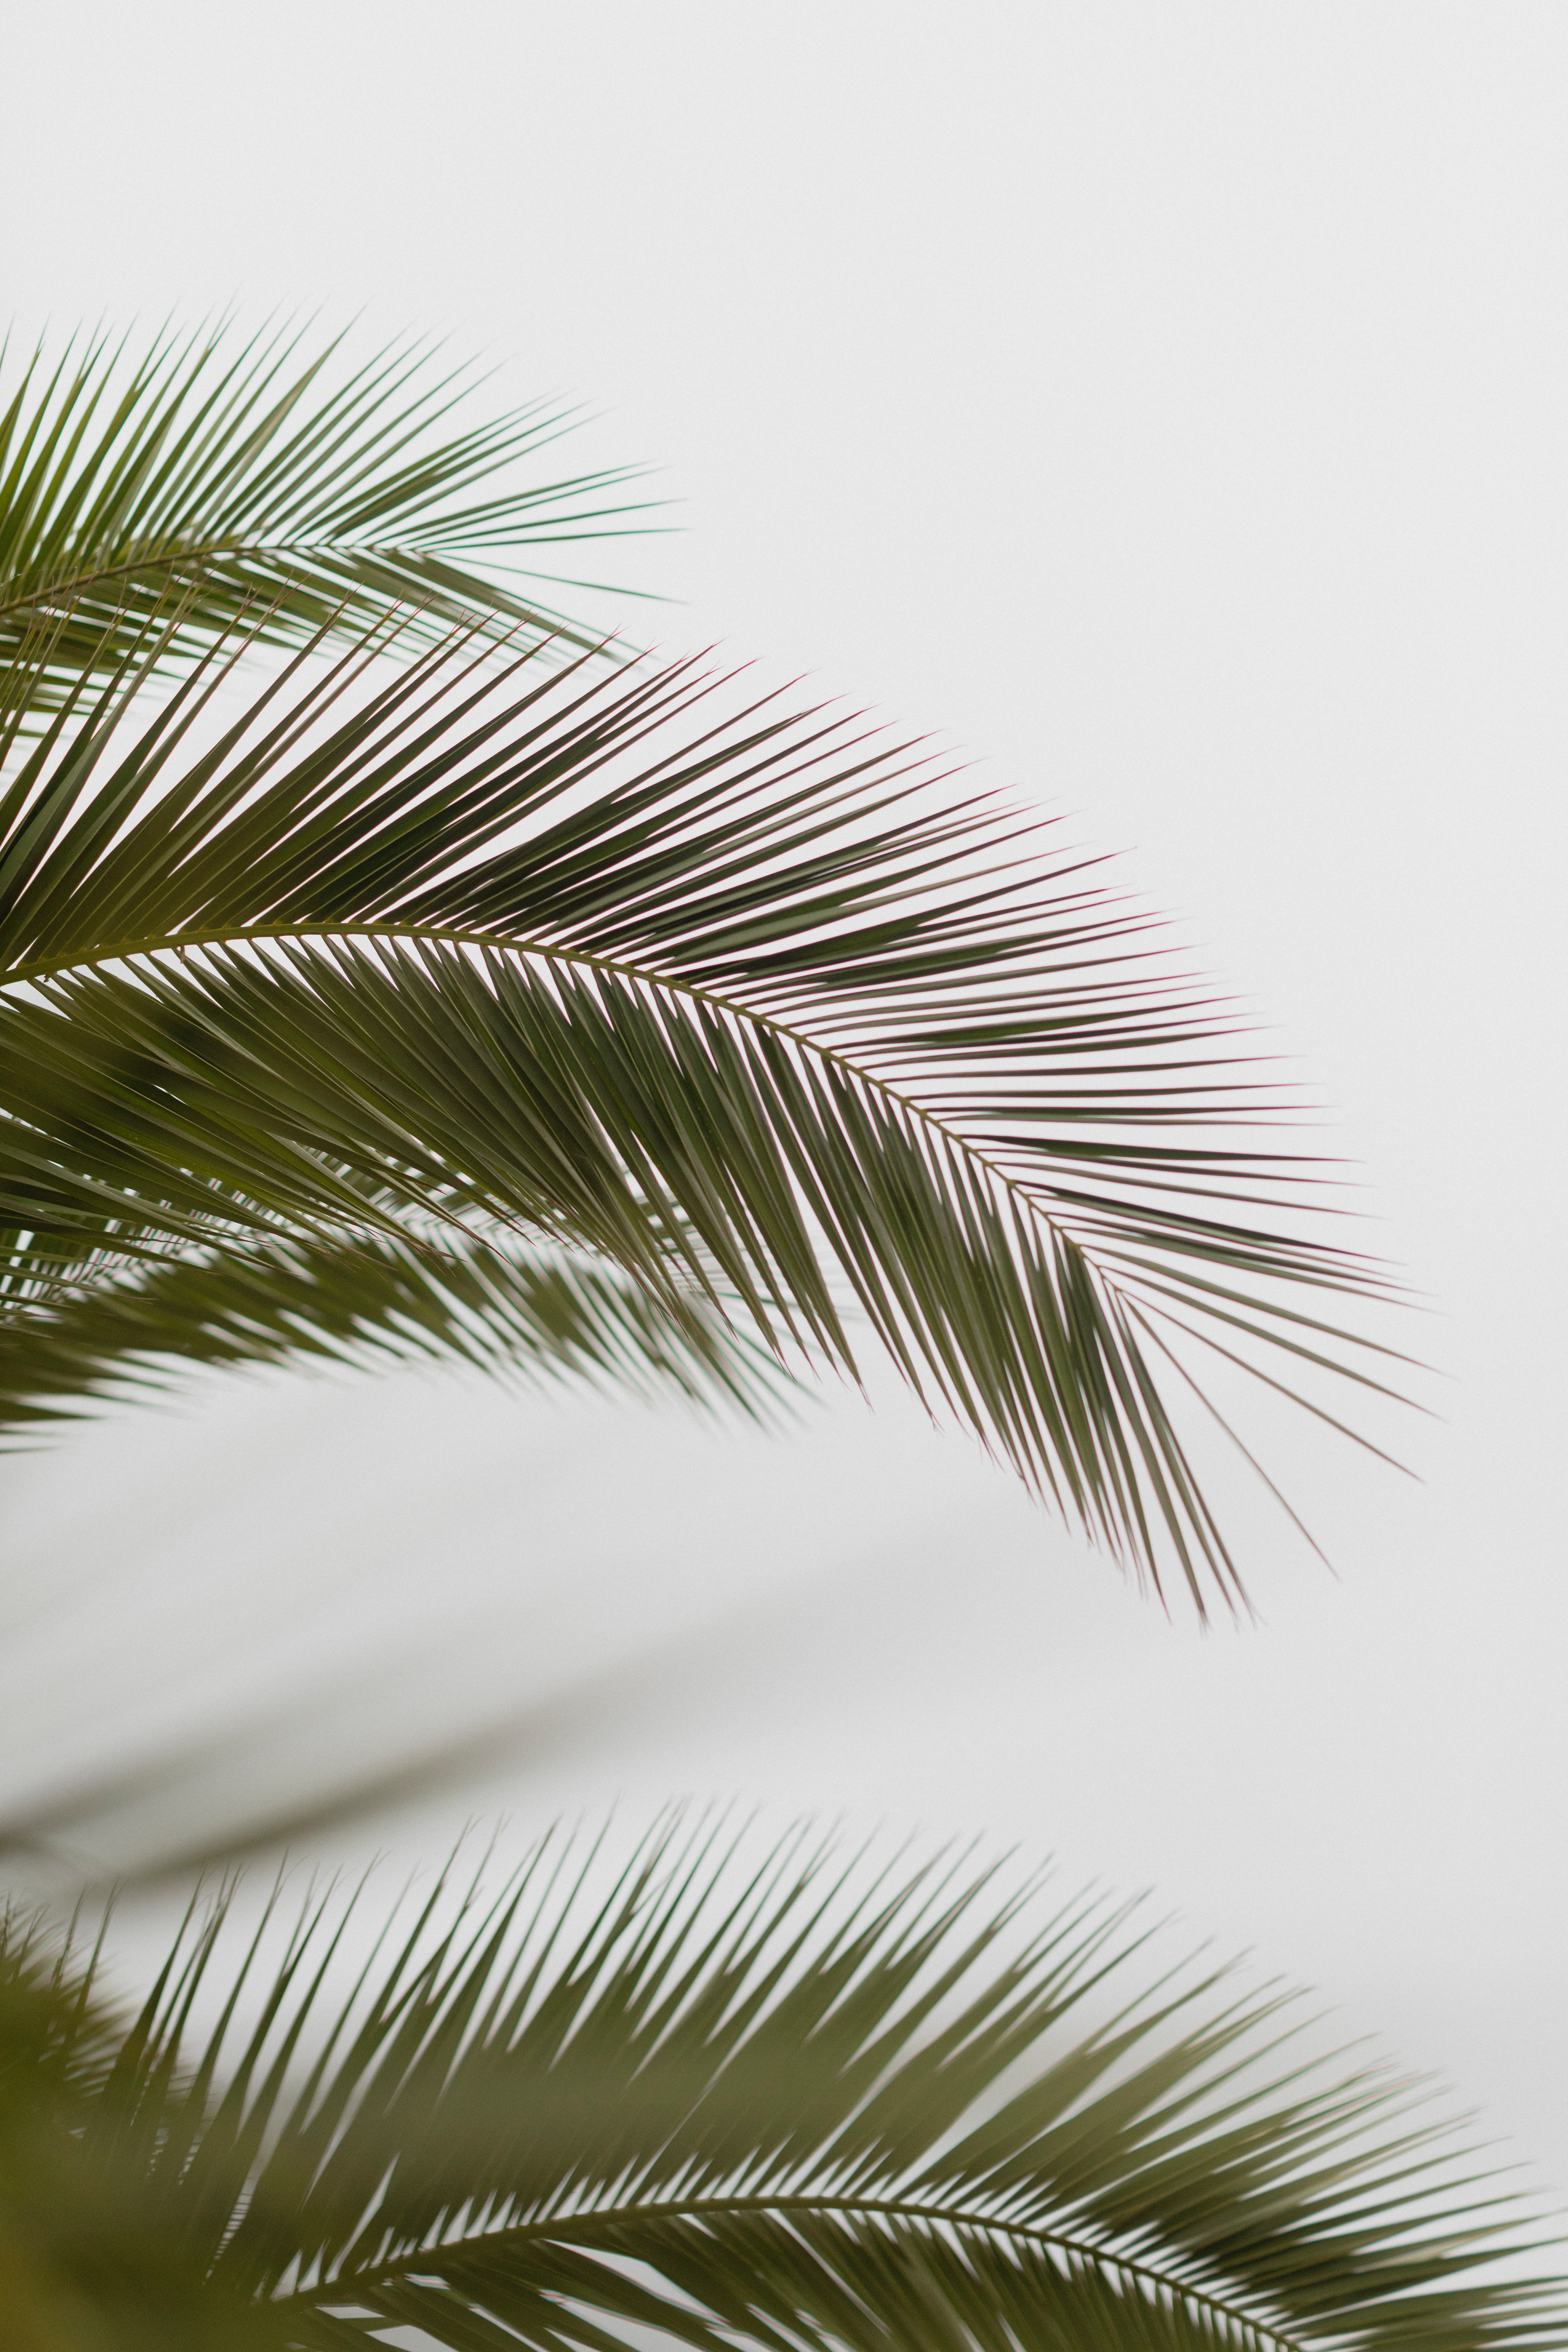 carved, minimalism, branch, palm Hd 1080p Mobile